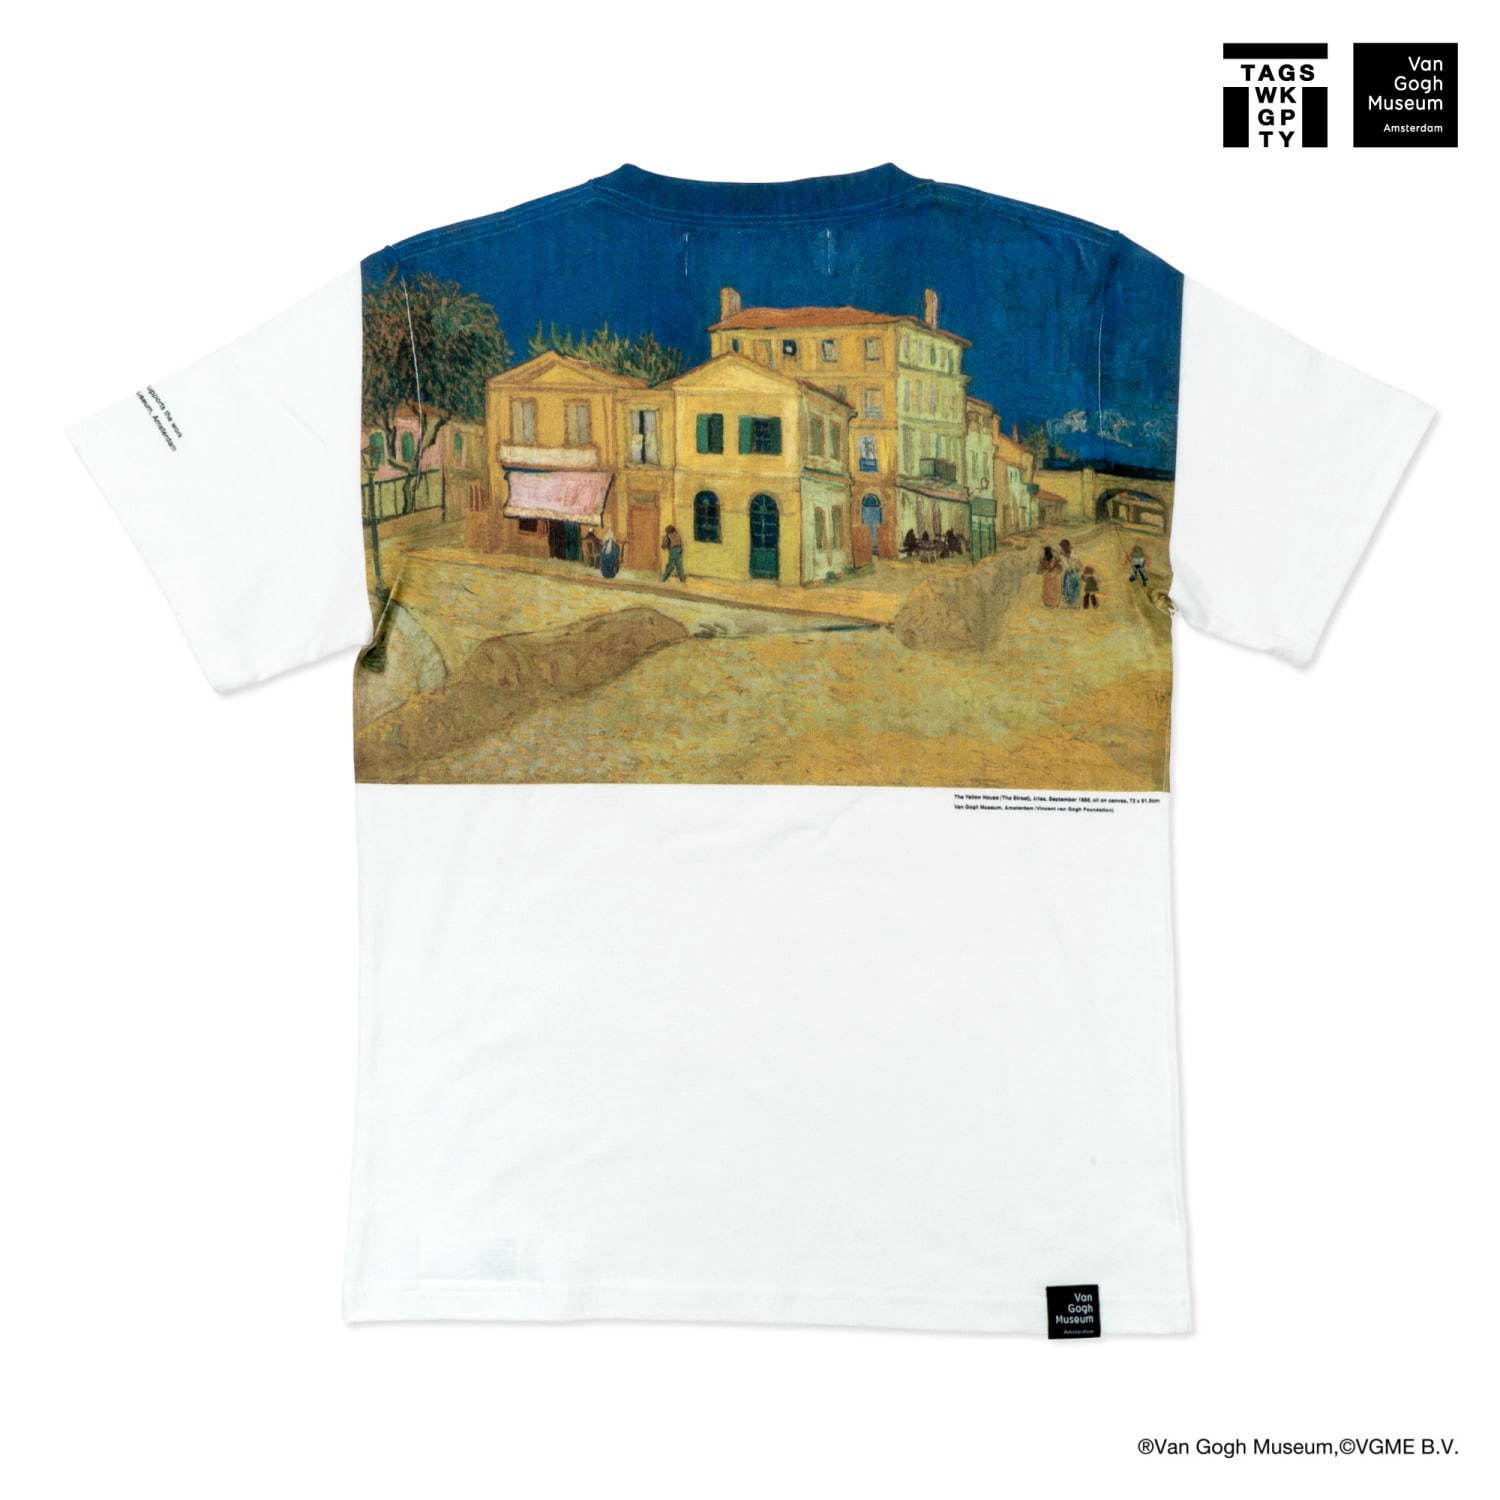 The Yellow House Tシャツ 13,000円+税